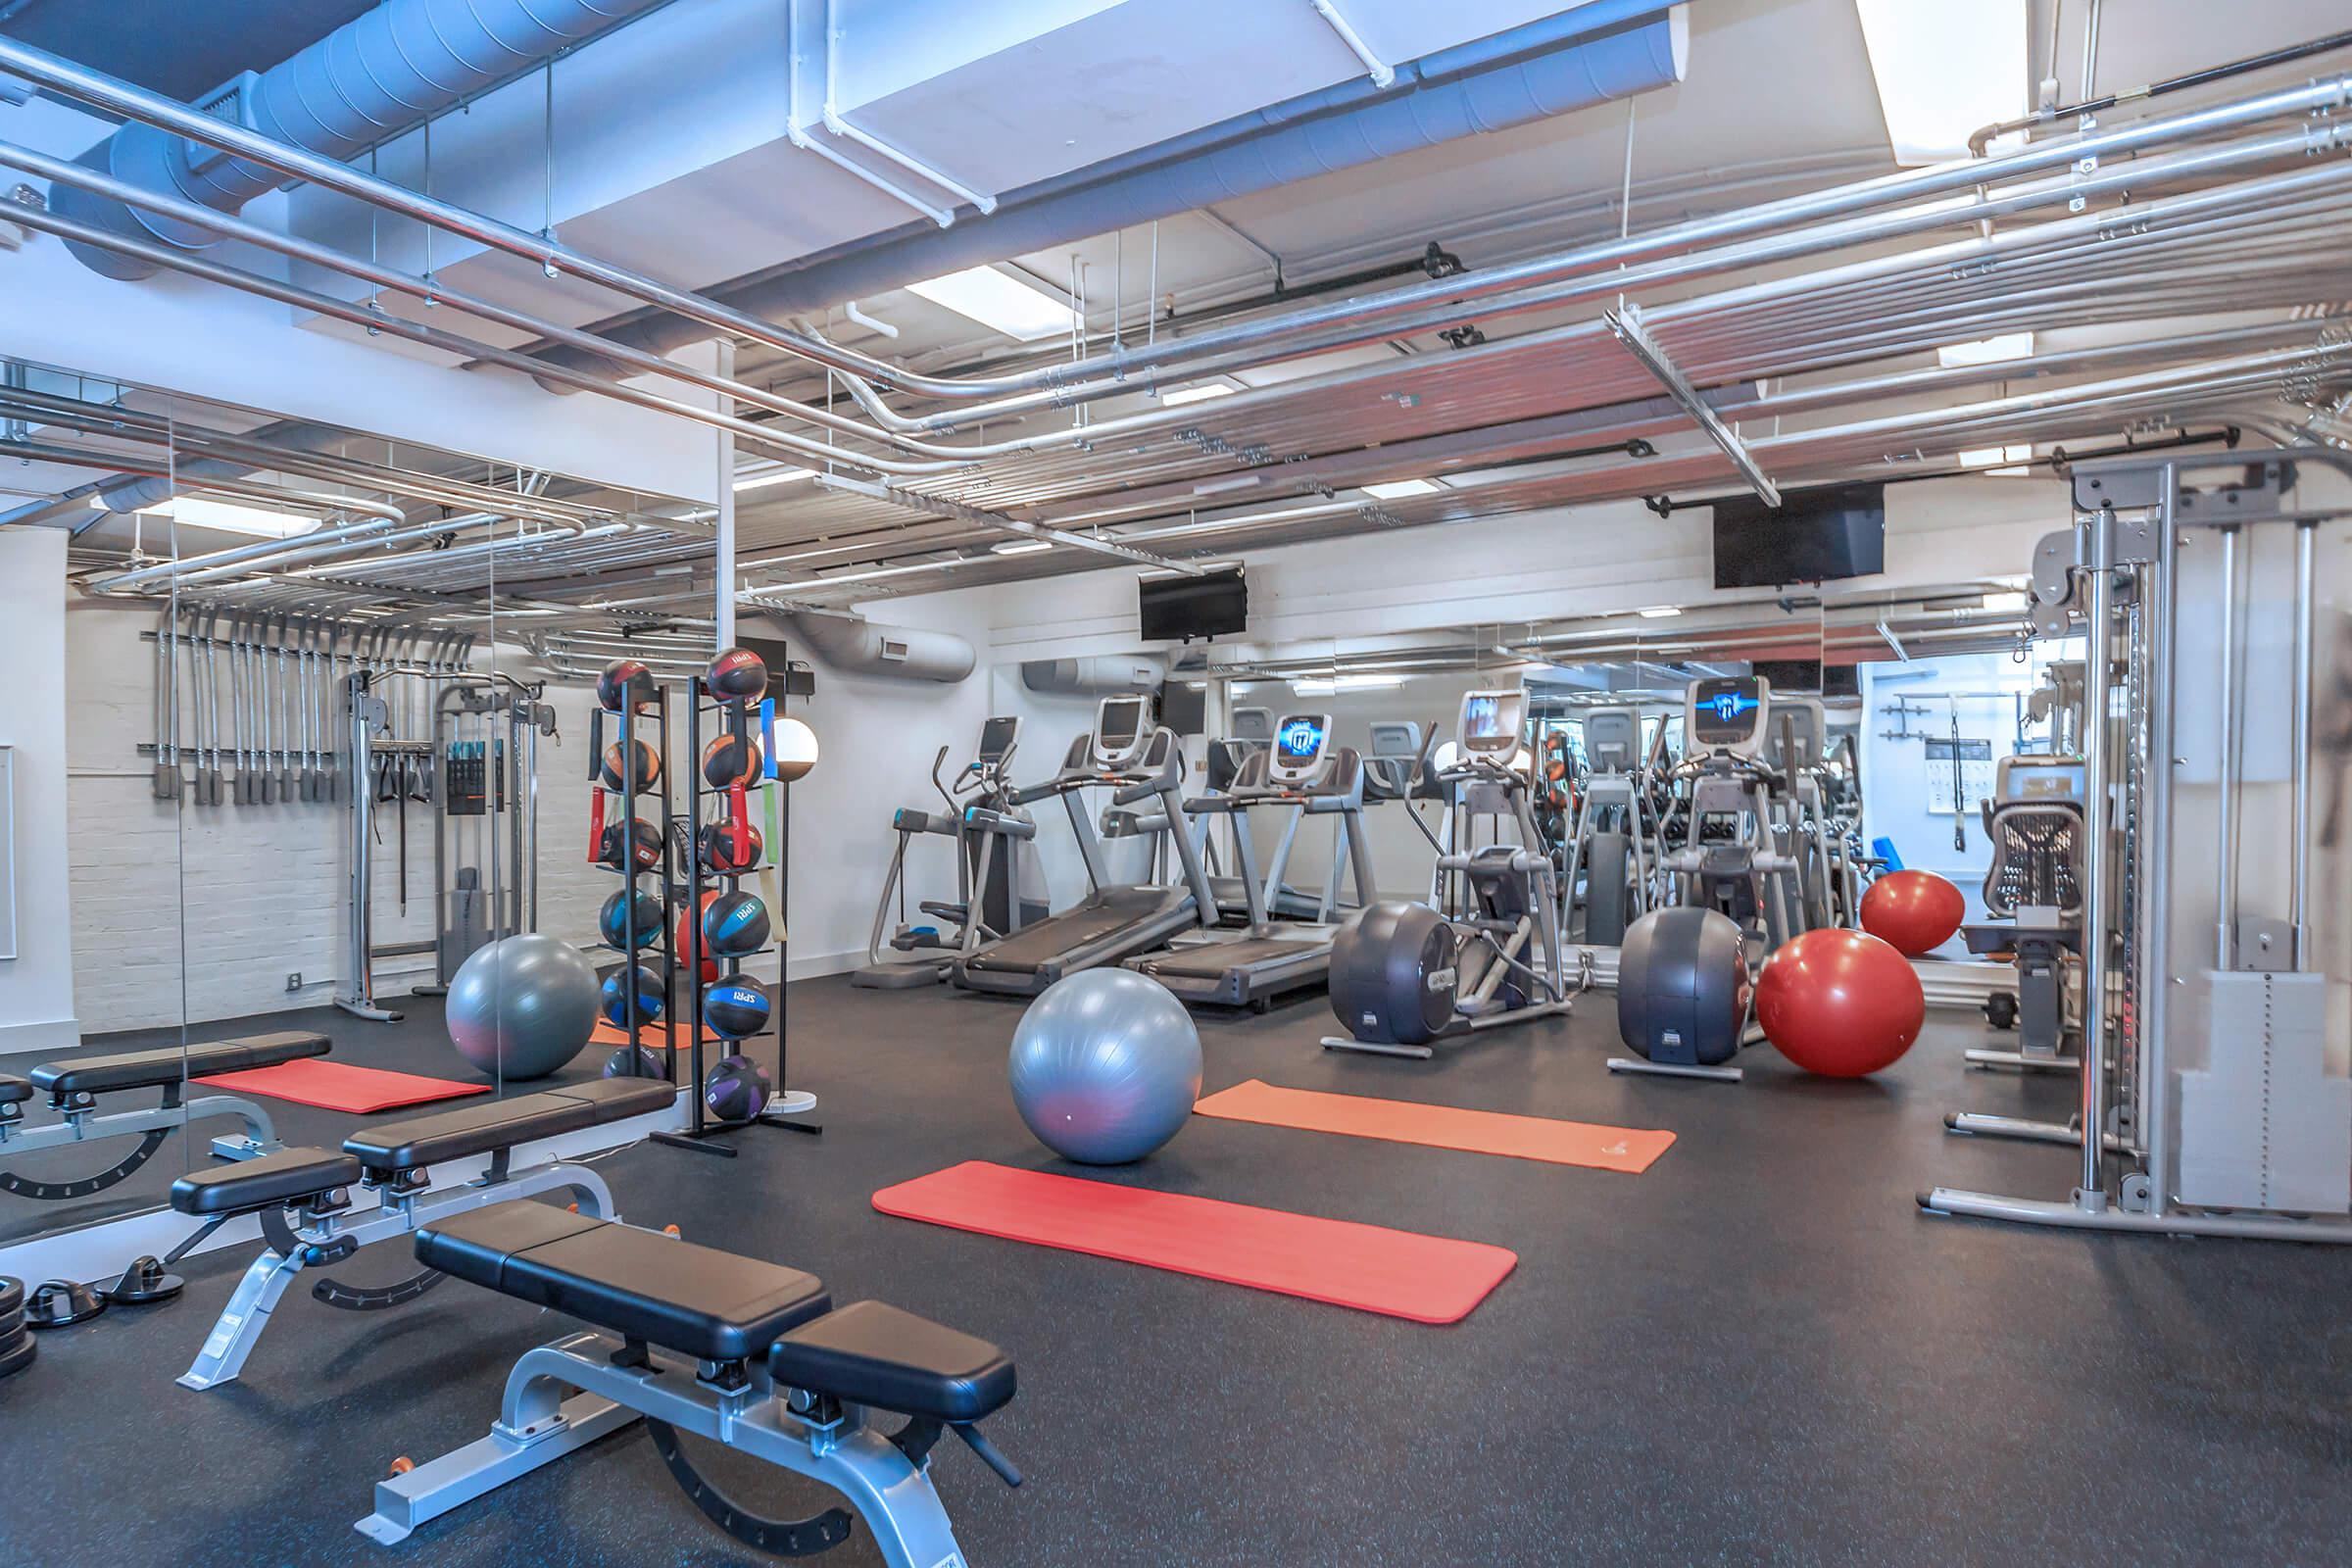 State-of-the-art fitness center at The Lofts at South Slope in Asheville, North Carolina.